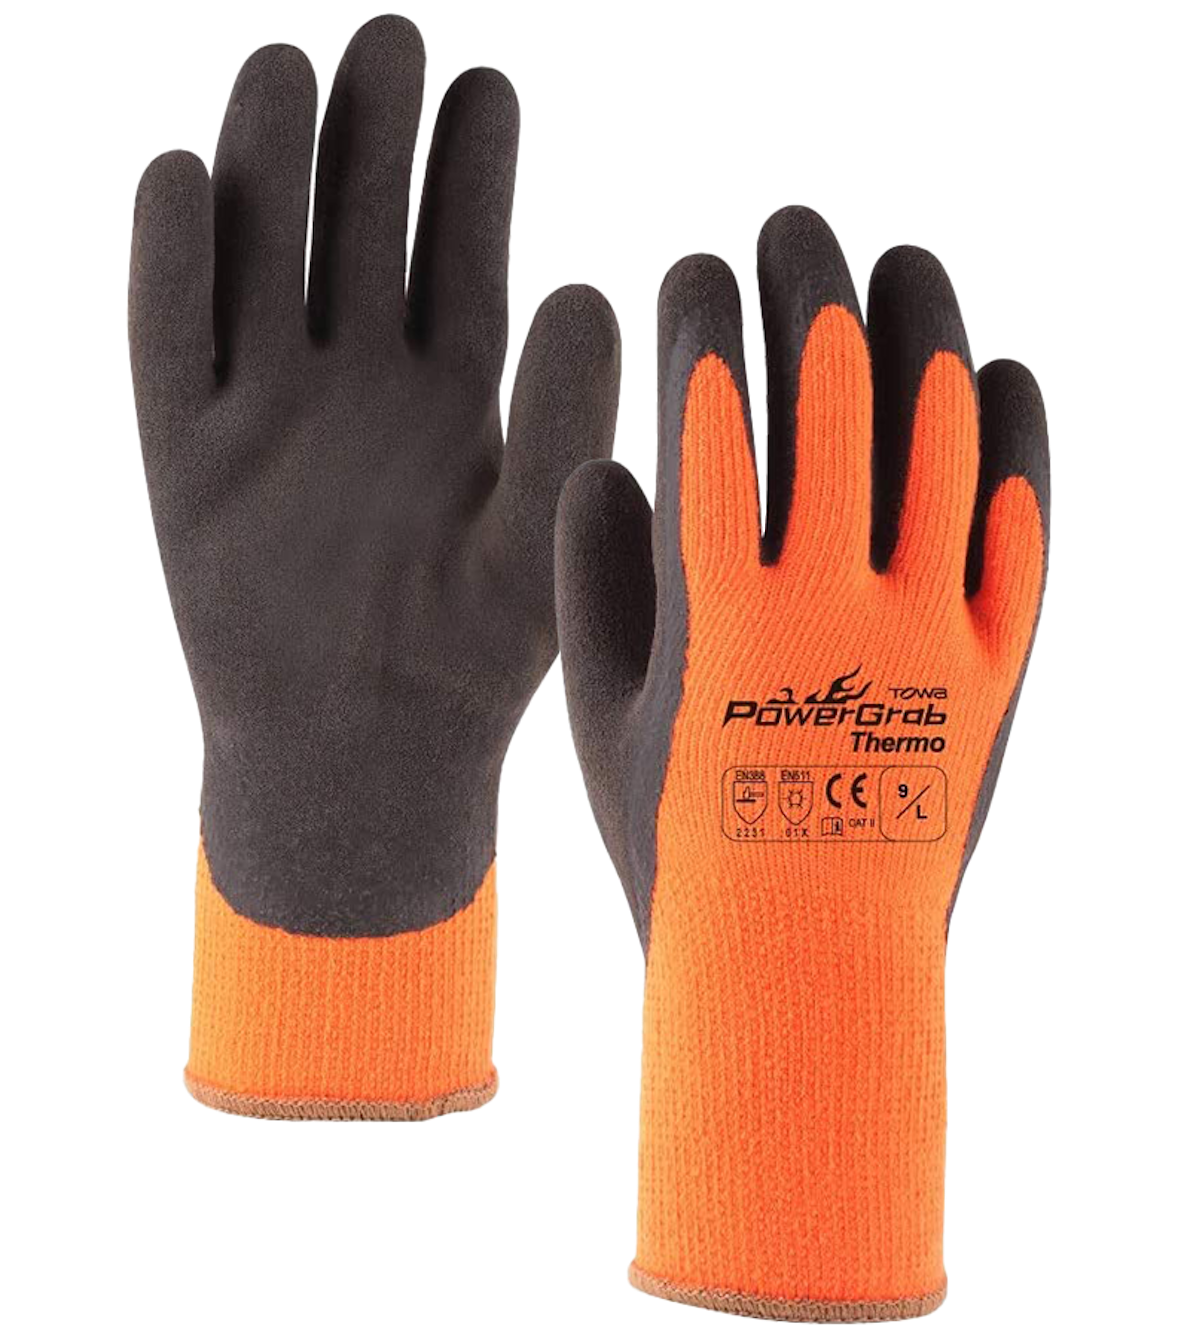 Cold Protection Gloves POWERGRAB THERMO